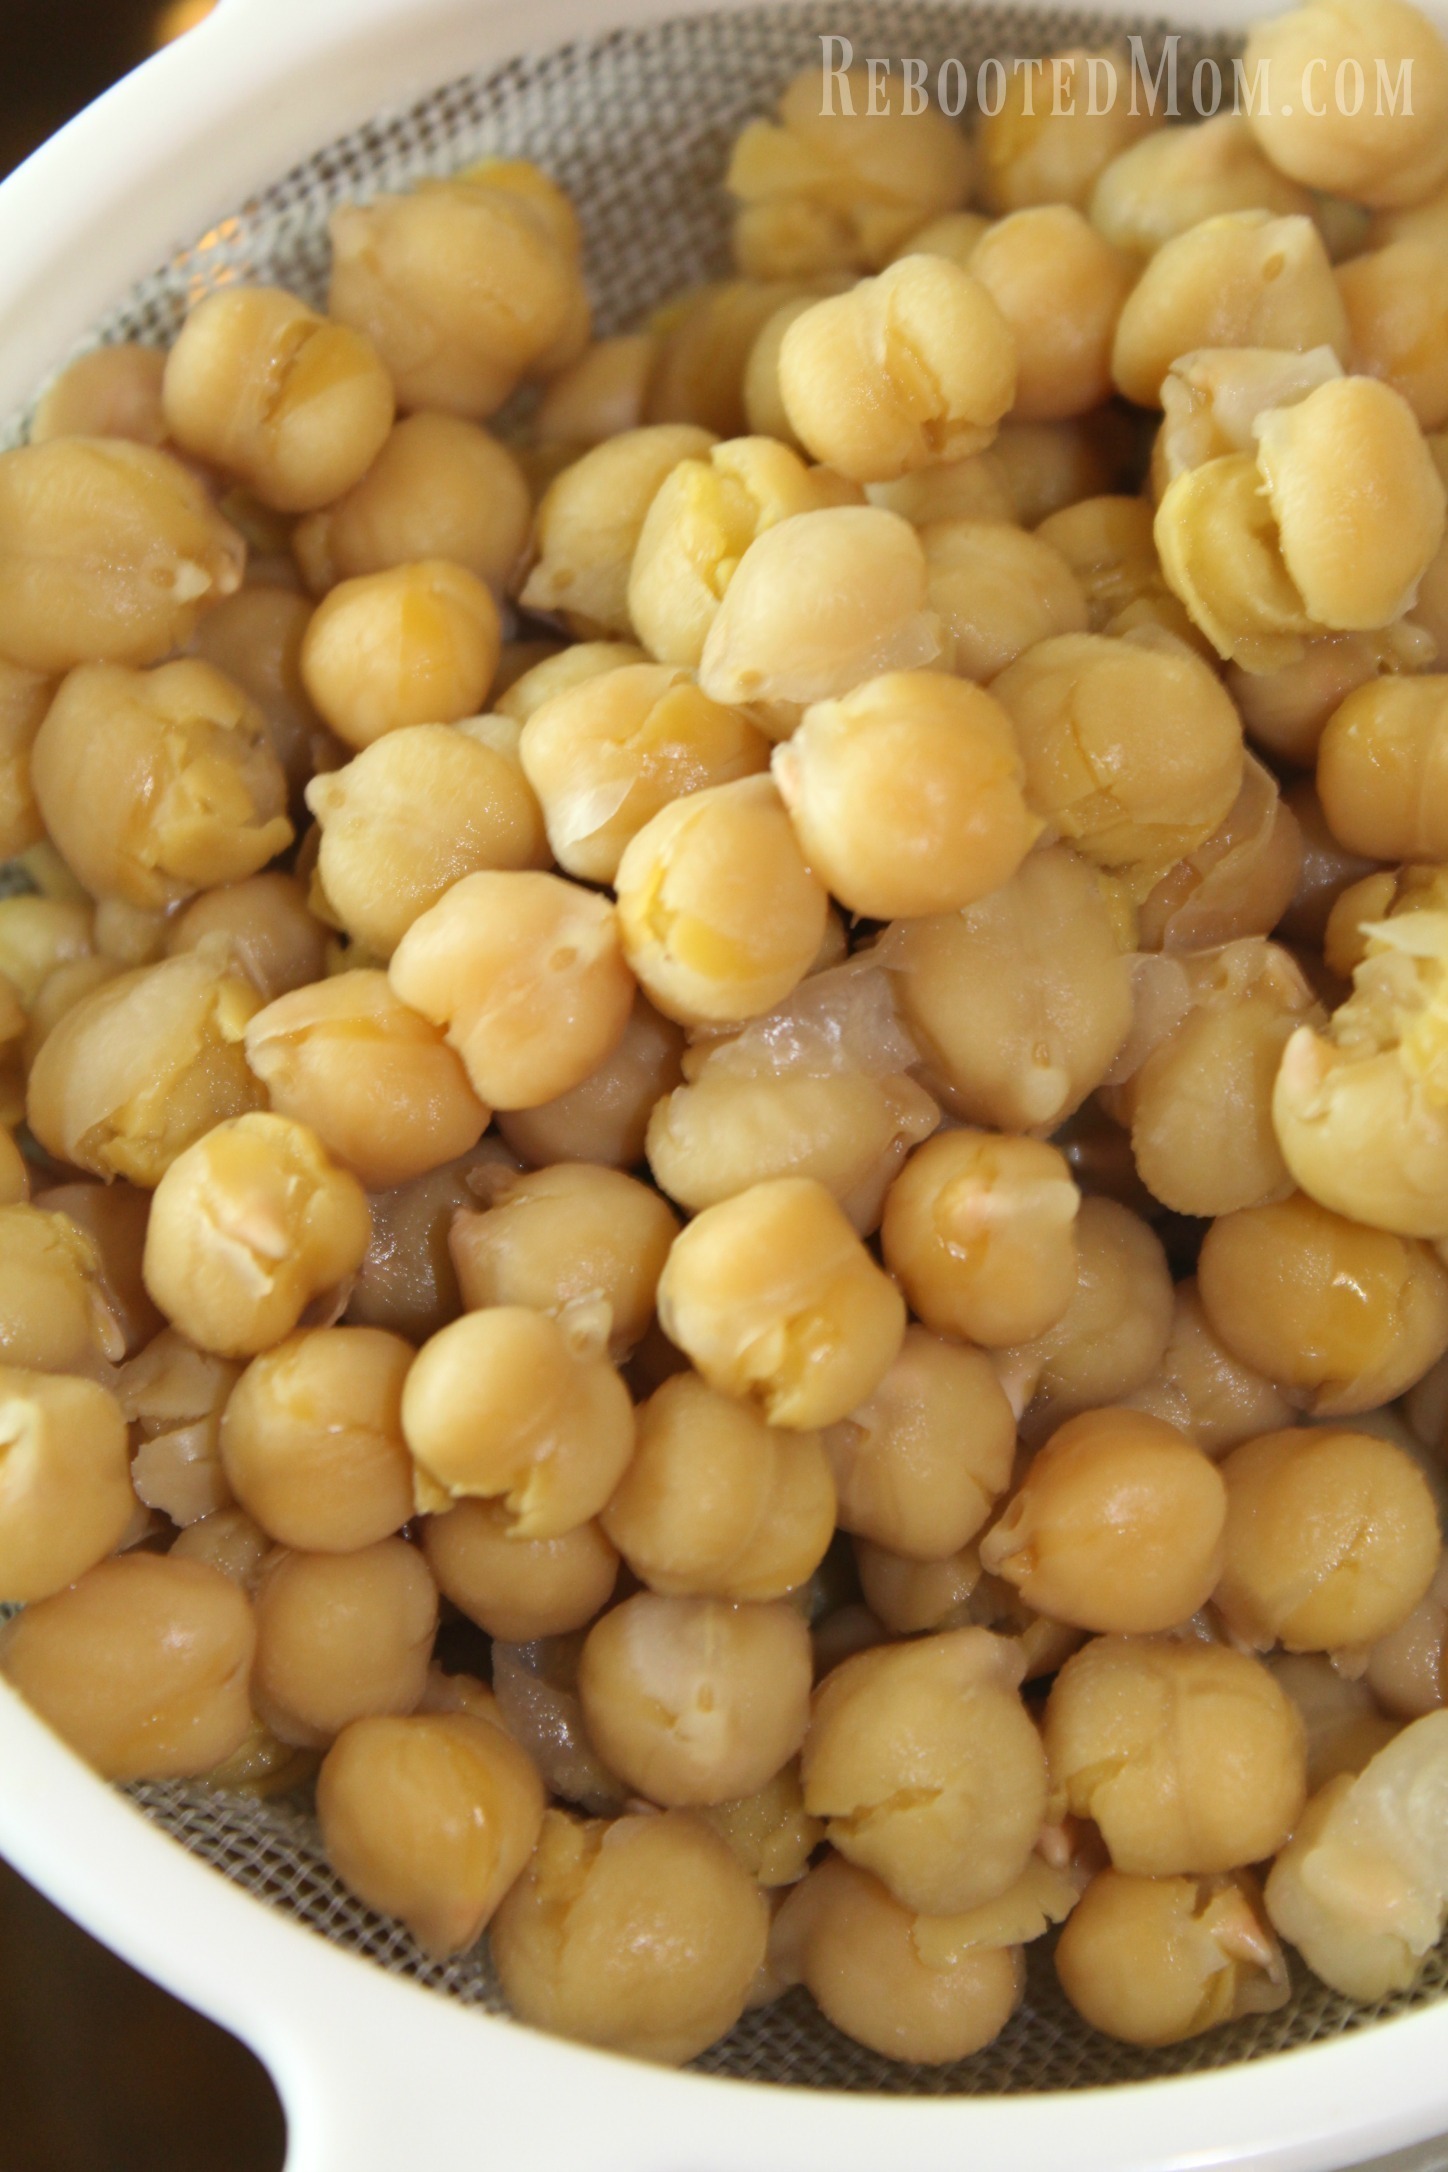 Try cooking chickpeas, or, garbanzo beans, in the Instant Pot or pressure cooker. This no-frills method is quick and easy!